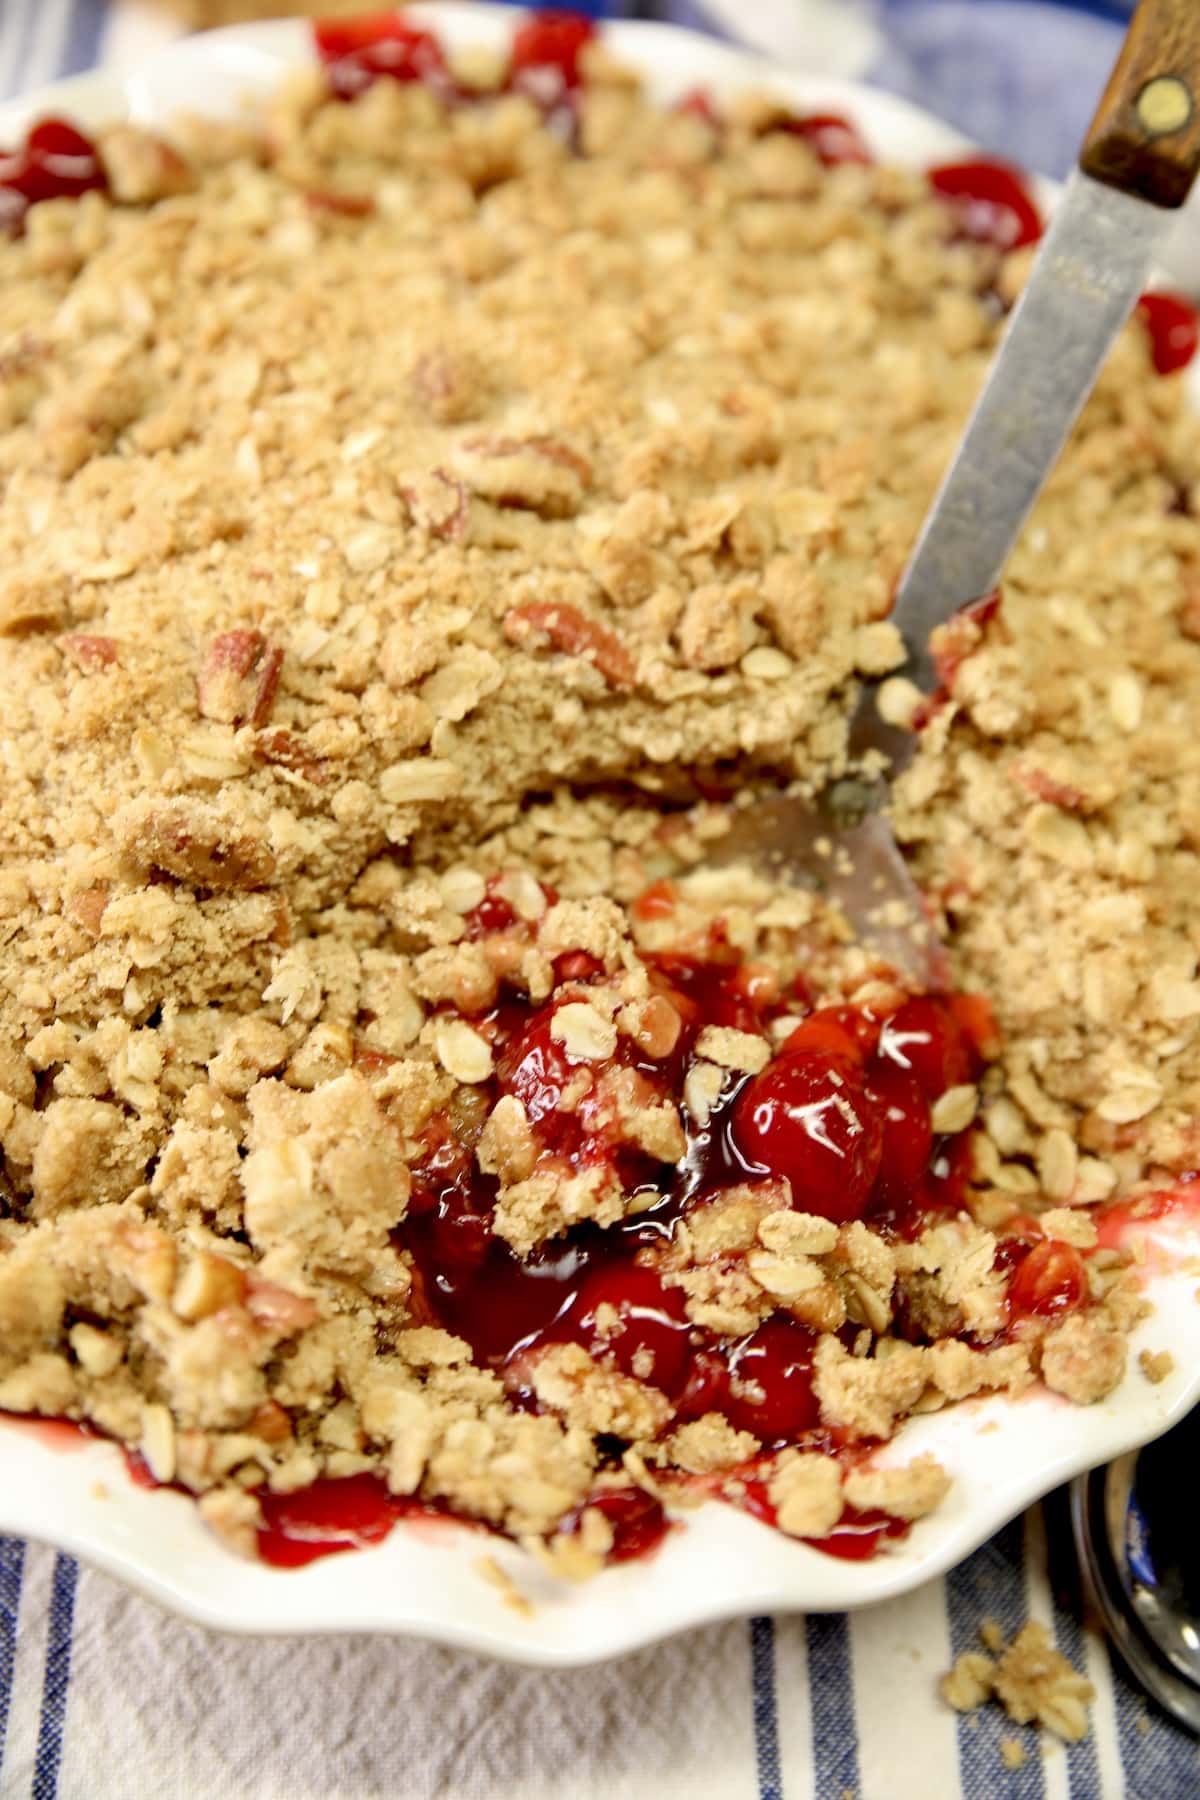 Pie plate of cherry crisp, with spoon scooping.